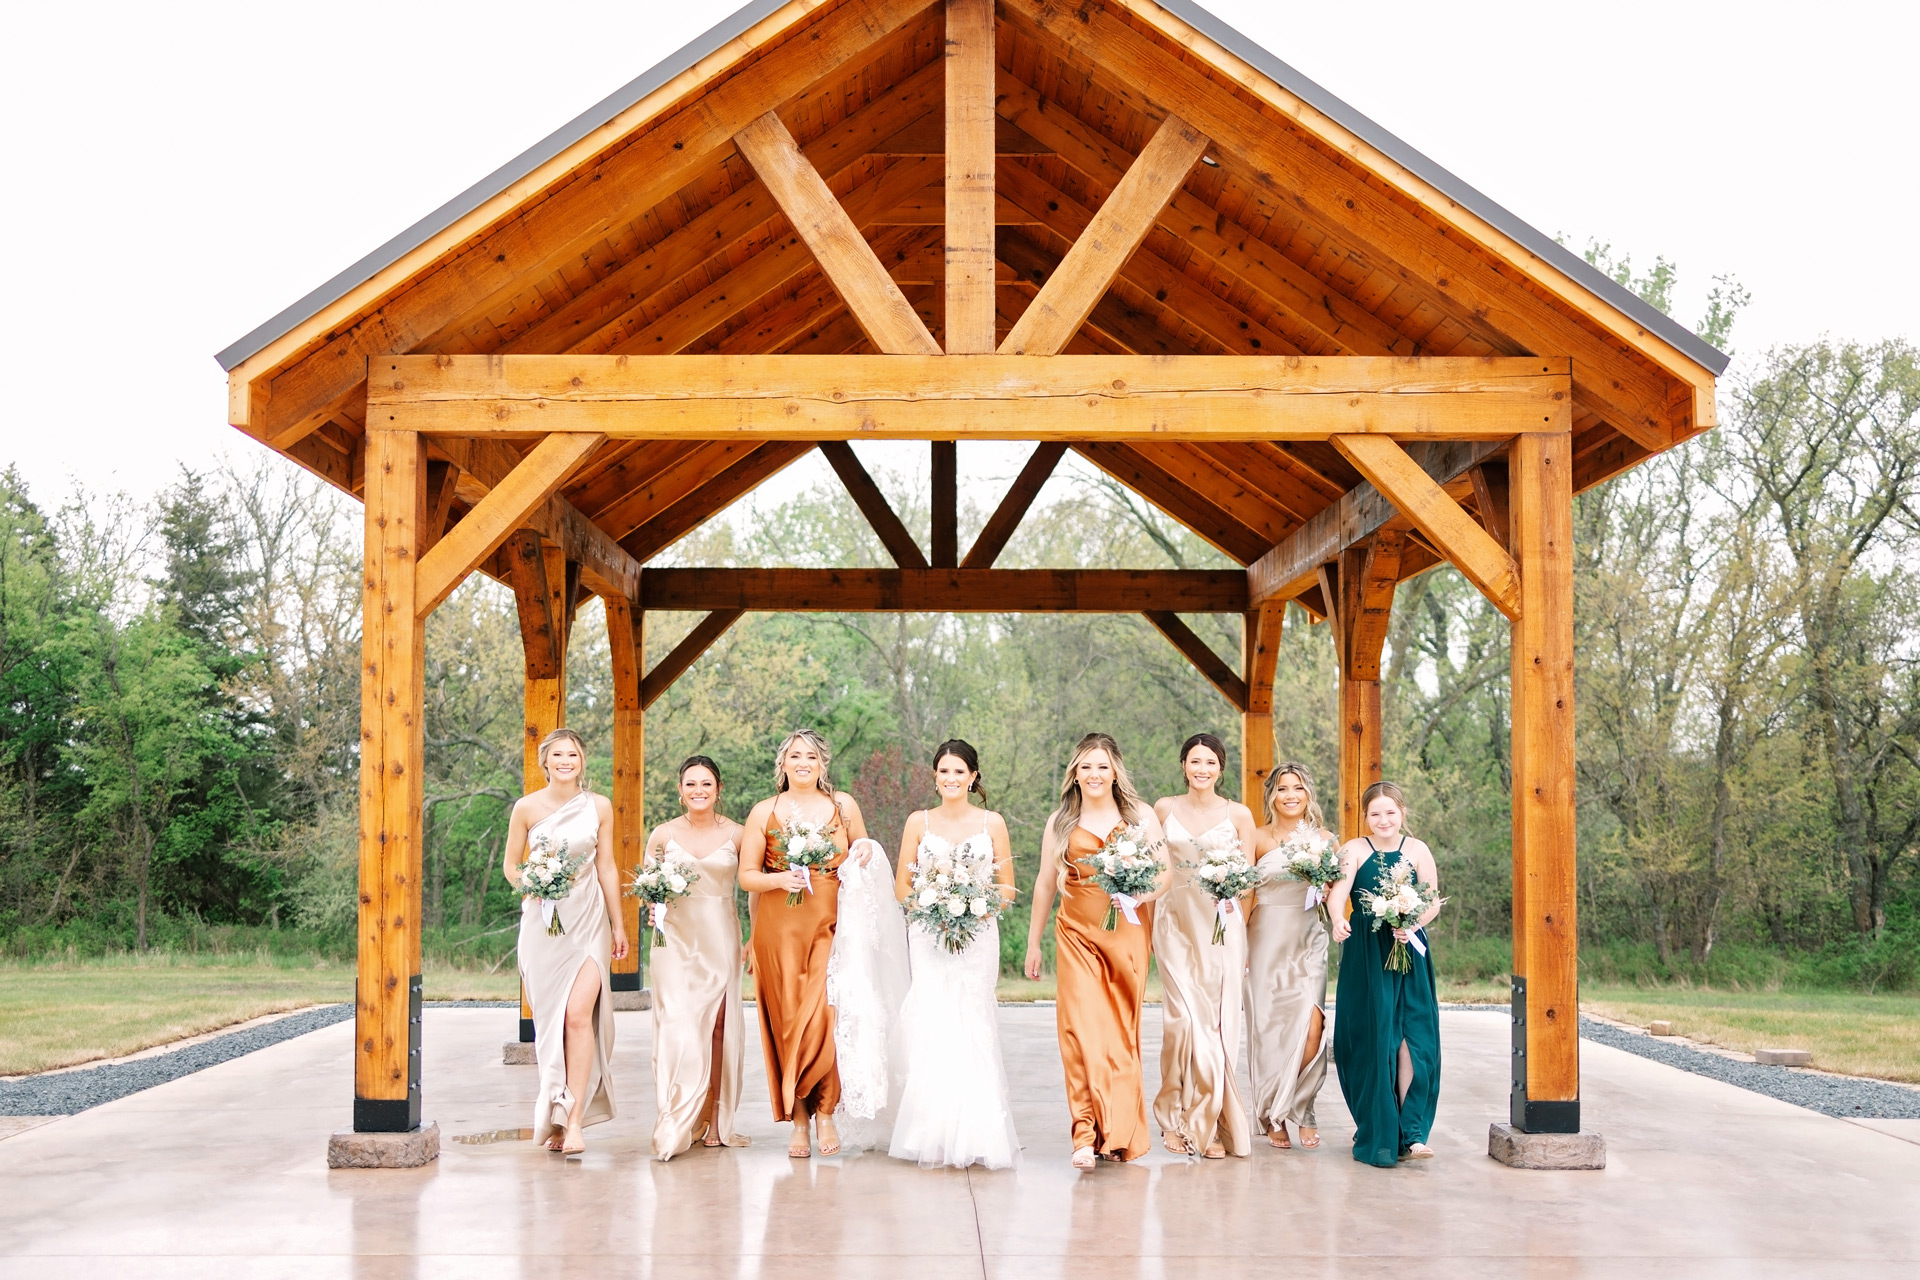 A Caucasian bride and 7 bridesmaids in cream, orange and green dresses in front of a wooden pavilion. Photography copyright Alicia Castañeda Photography.